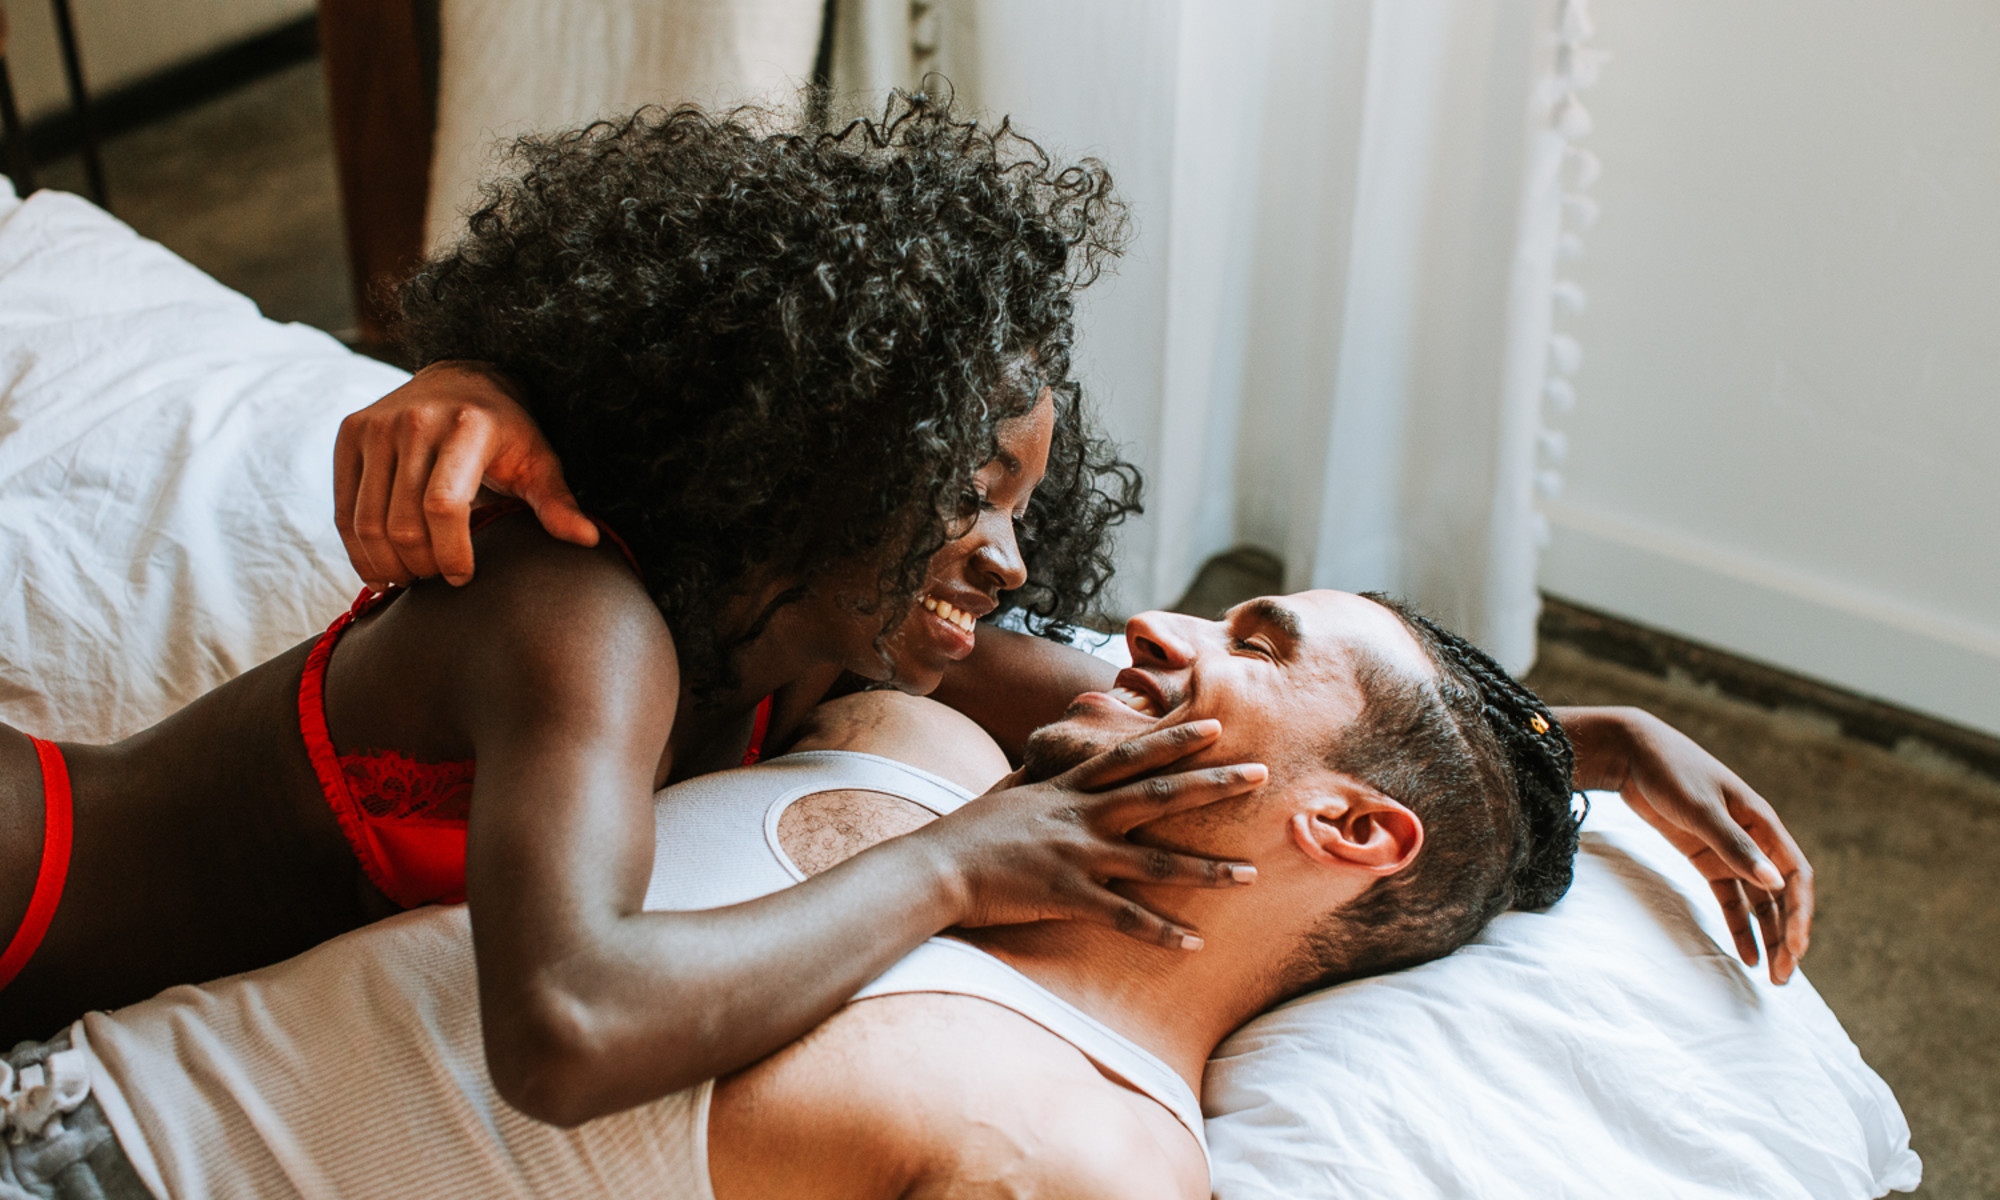 Romantic Rep Porn - Sexual Narcissist: Definition, Signs, And More | mindbodygreen